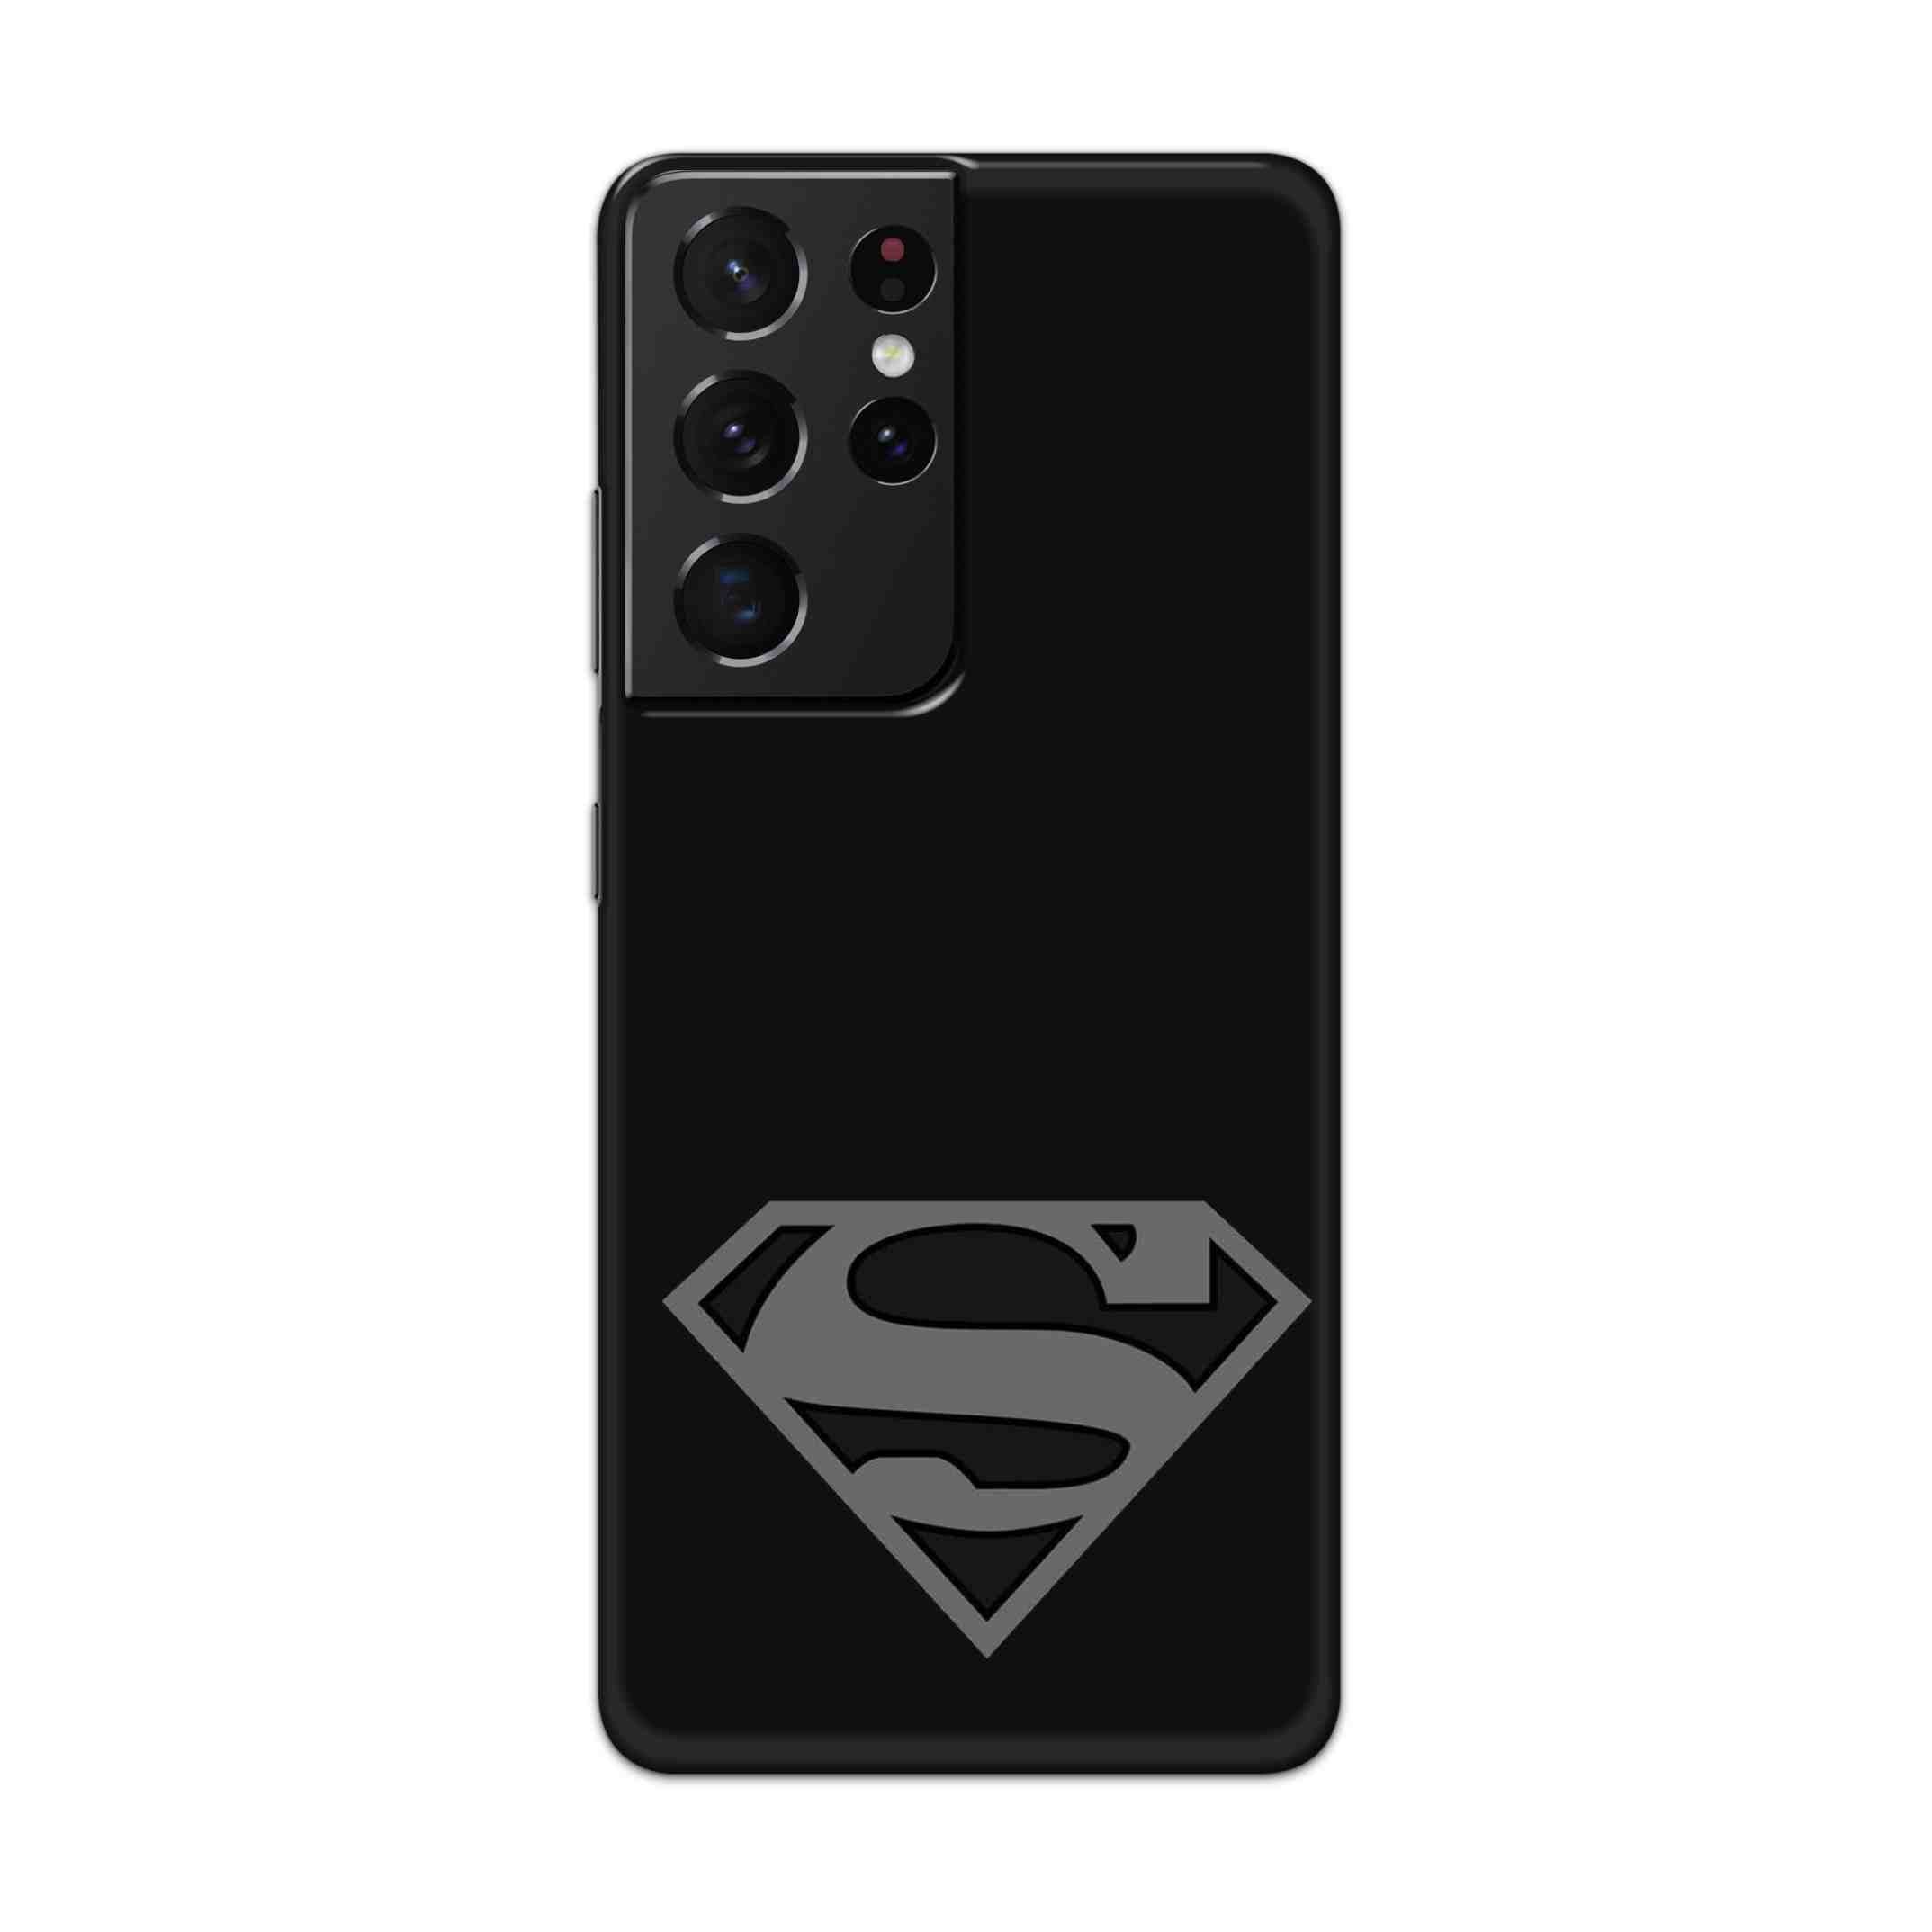 Buy Superman Logo Hard Back Mobile Phone Case Cover For Samsung Galaxy S21 Ultra Online